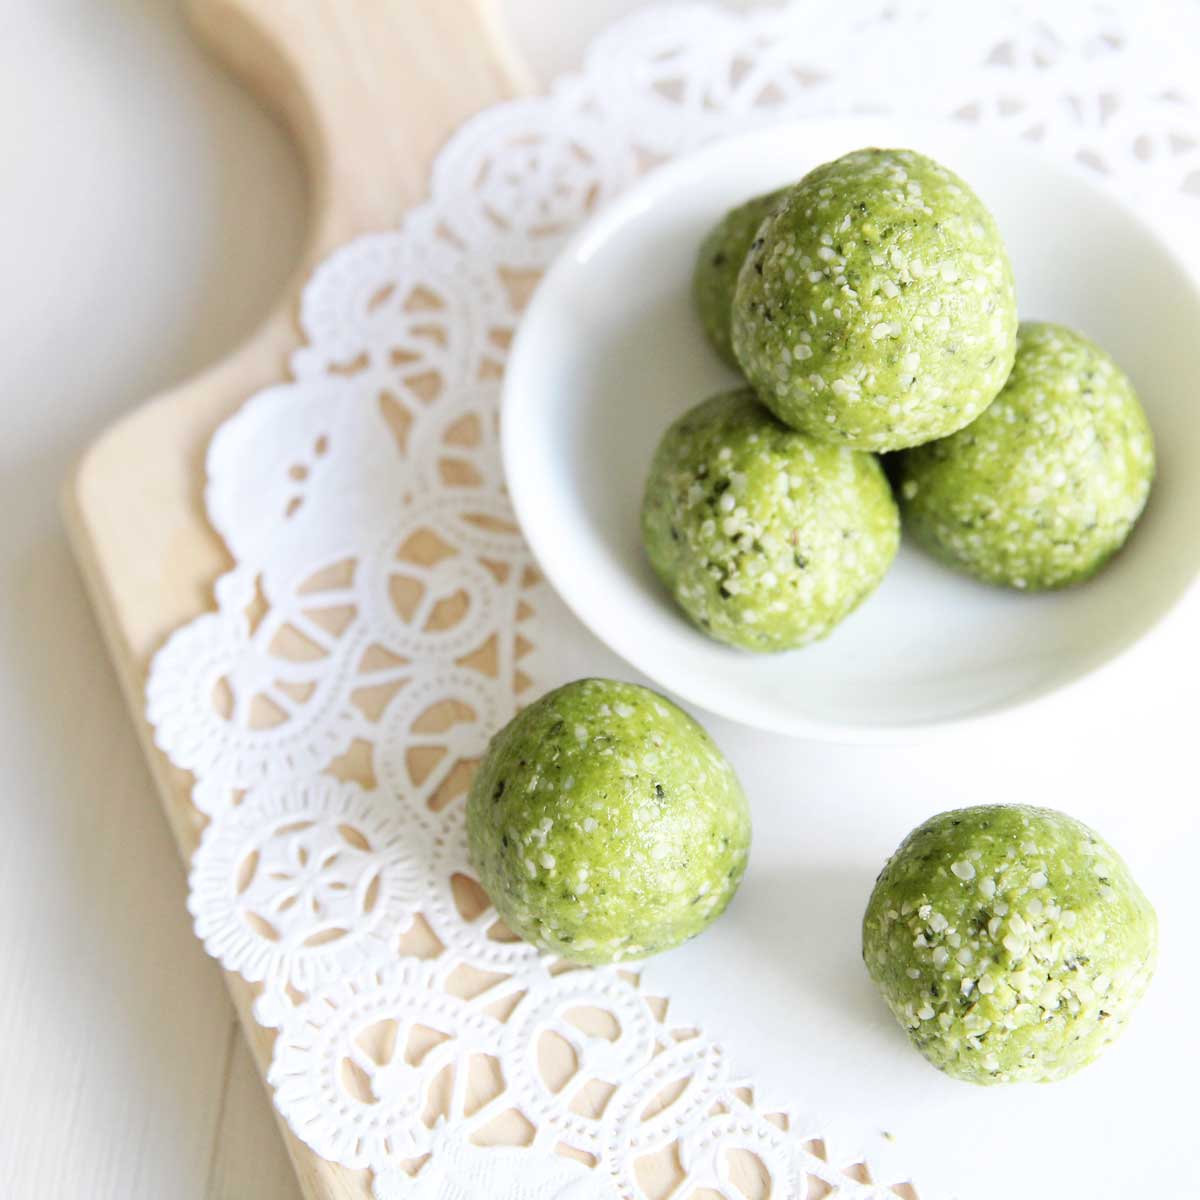 Power Packed Matcha Latte Protein Balls Recipe with Collagen Peptides - Nutella Protein Bars